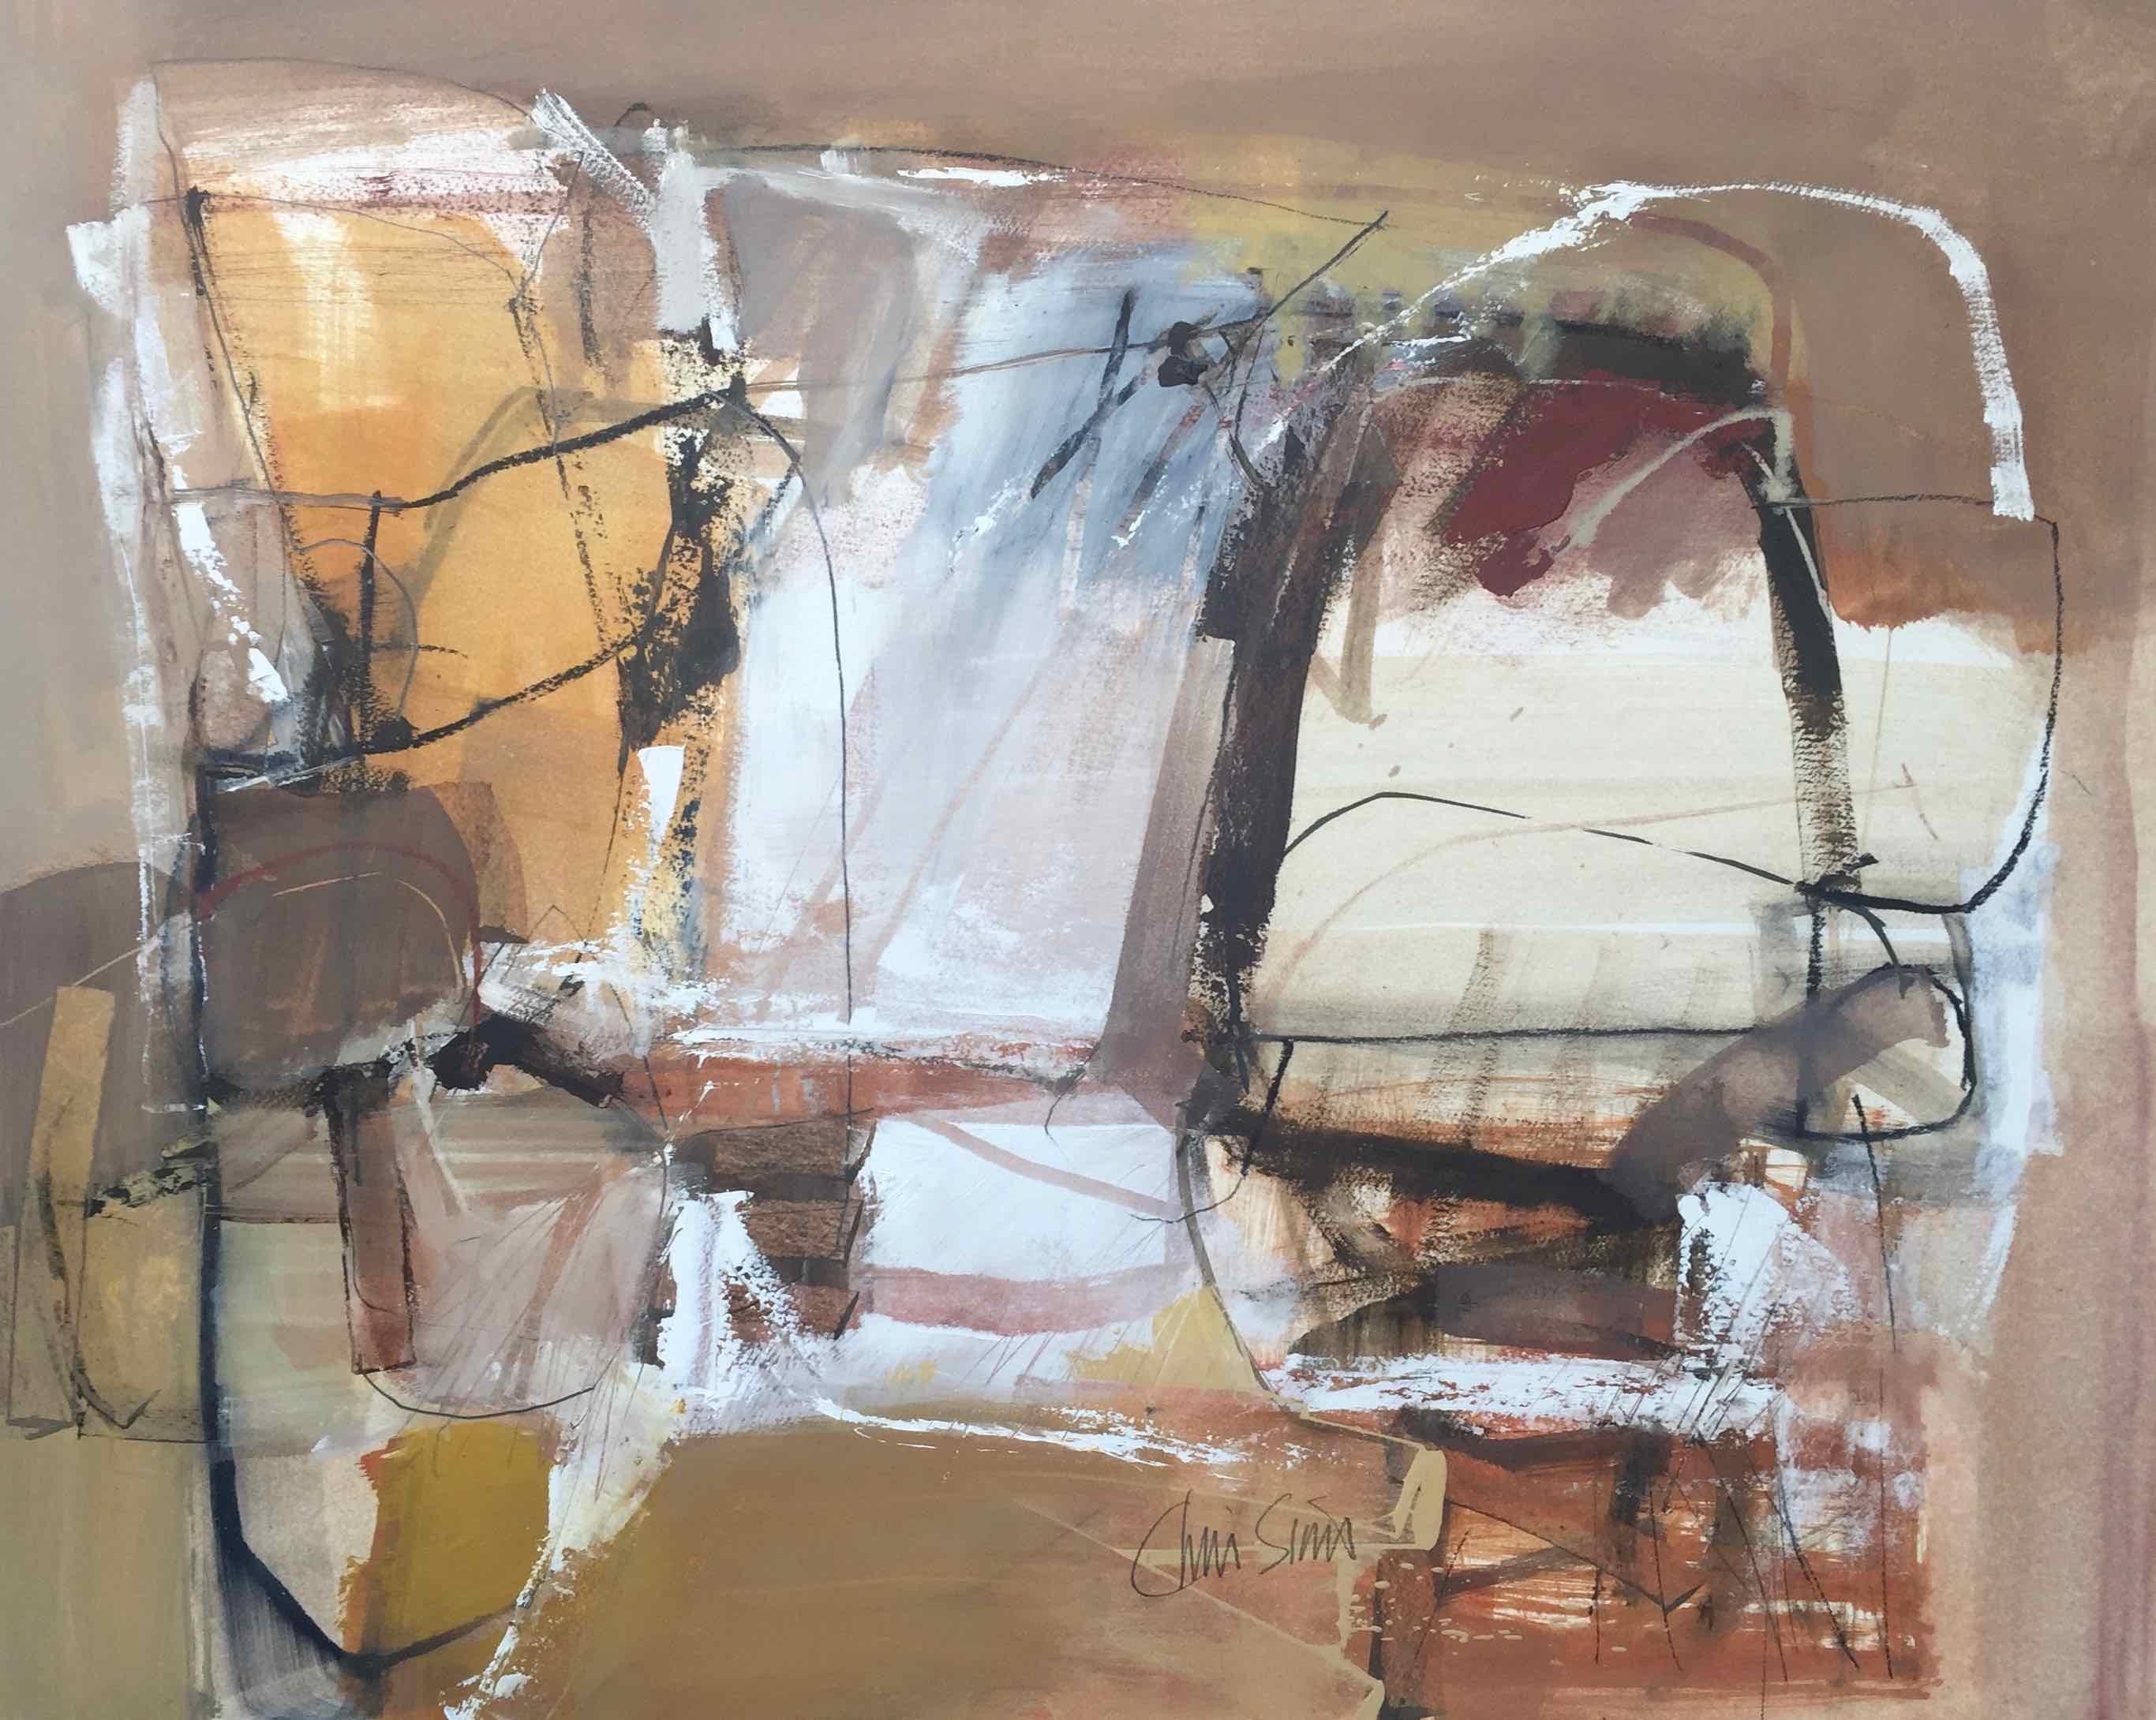 Work on Paper LP27: Abstract Landscape Oil Painting by Chris Sims